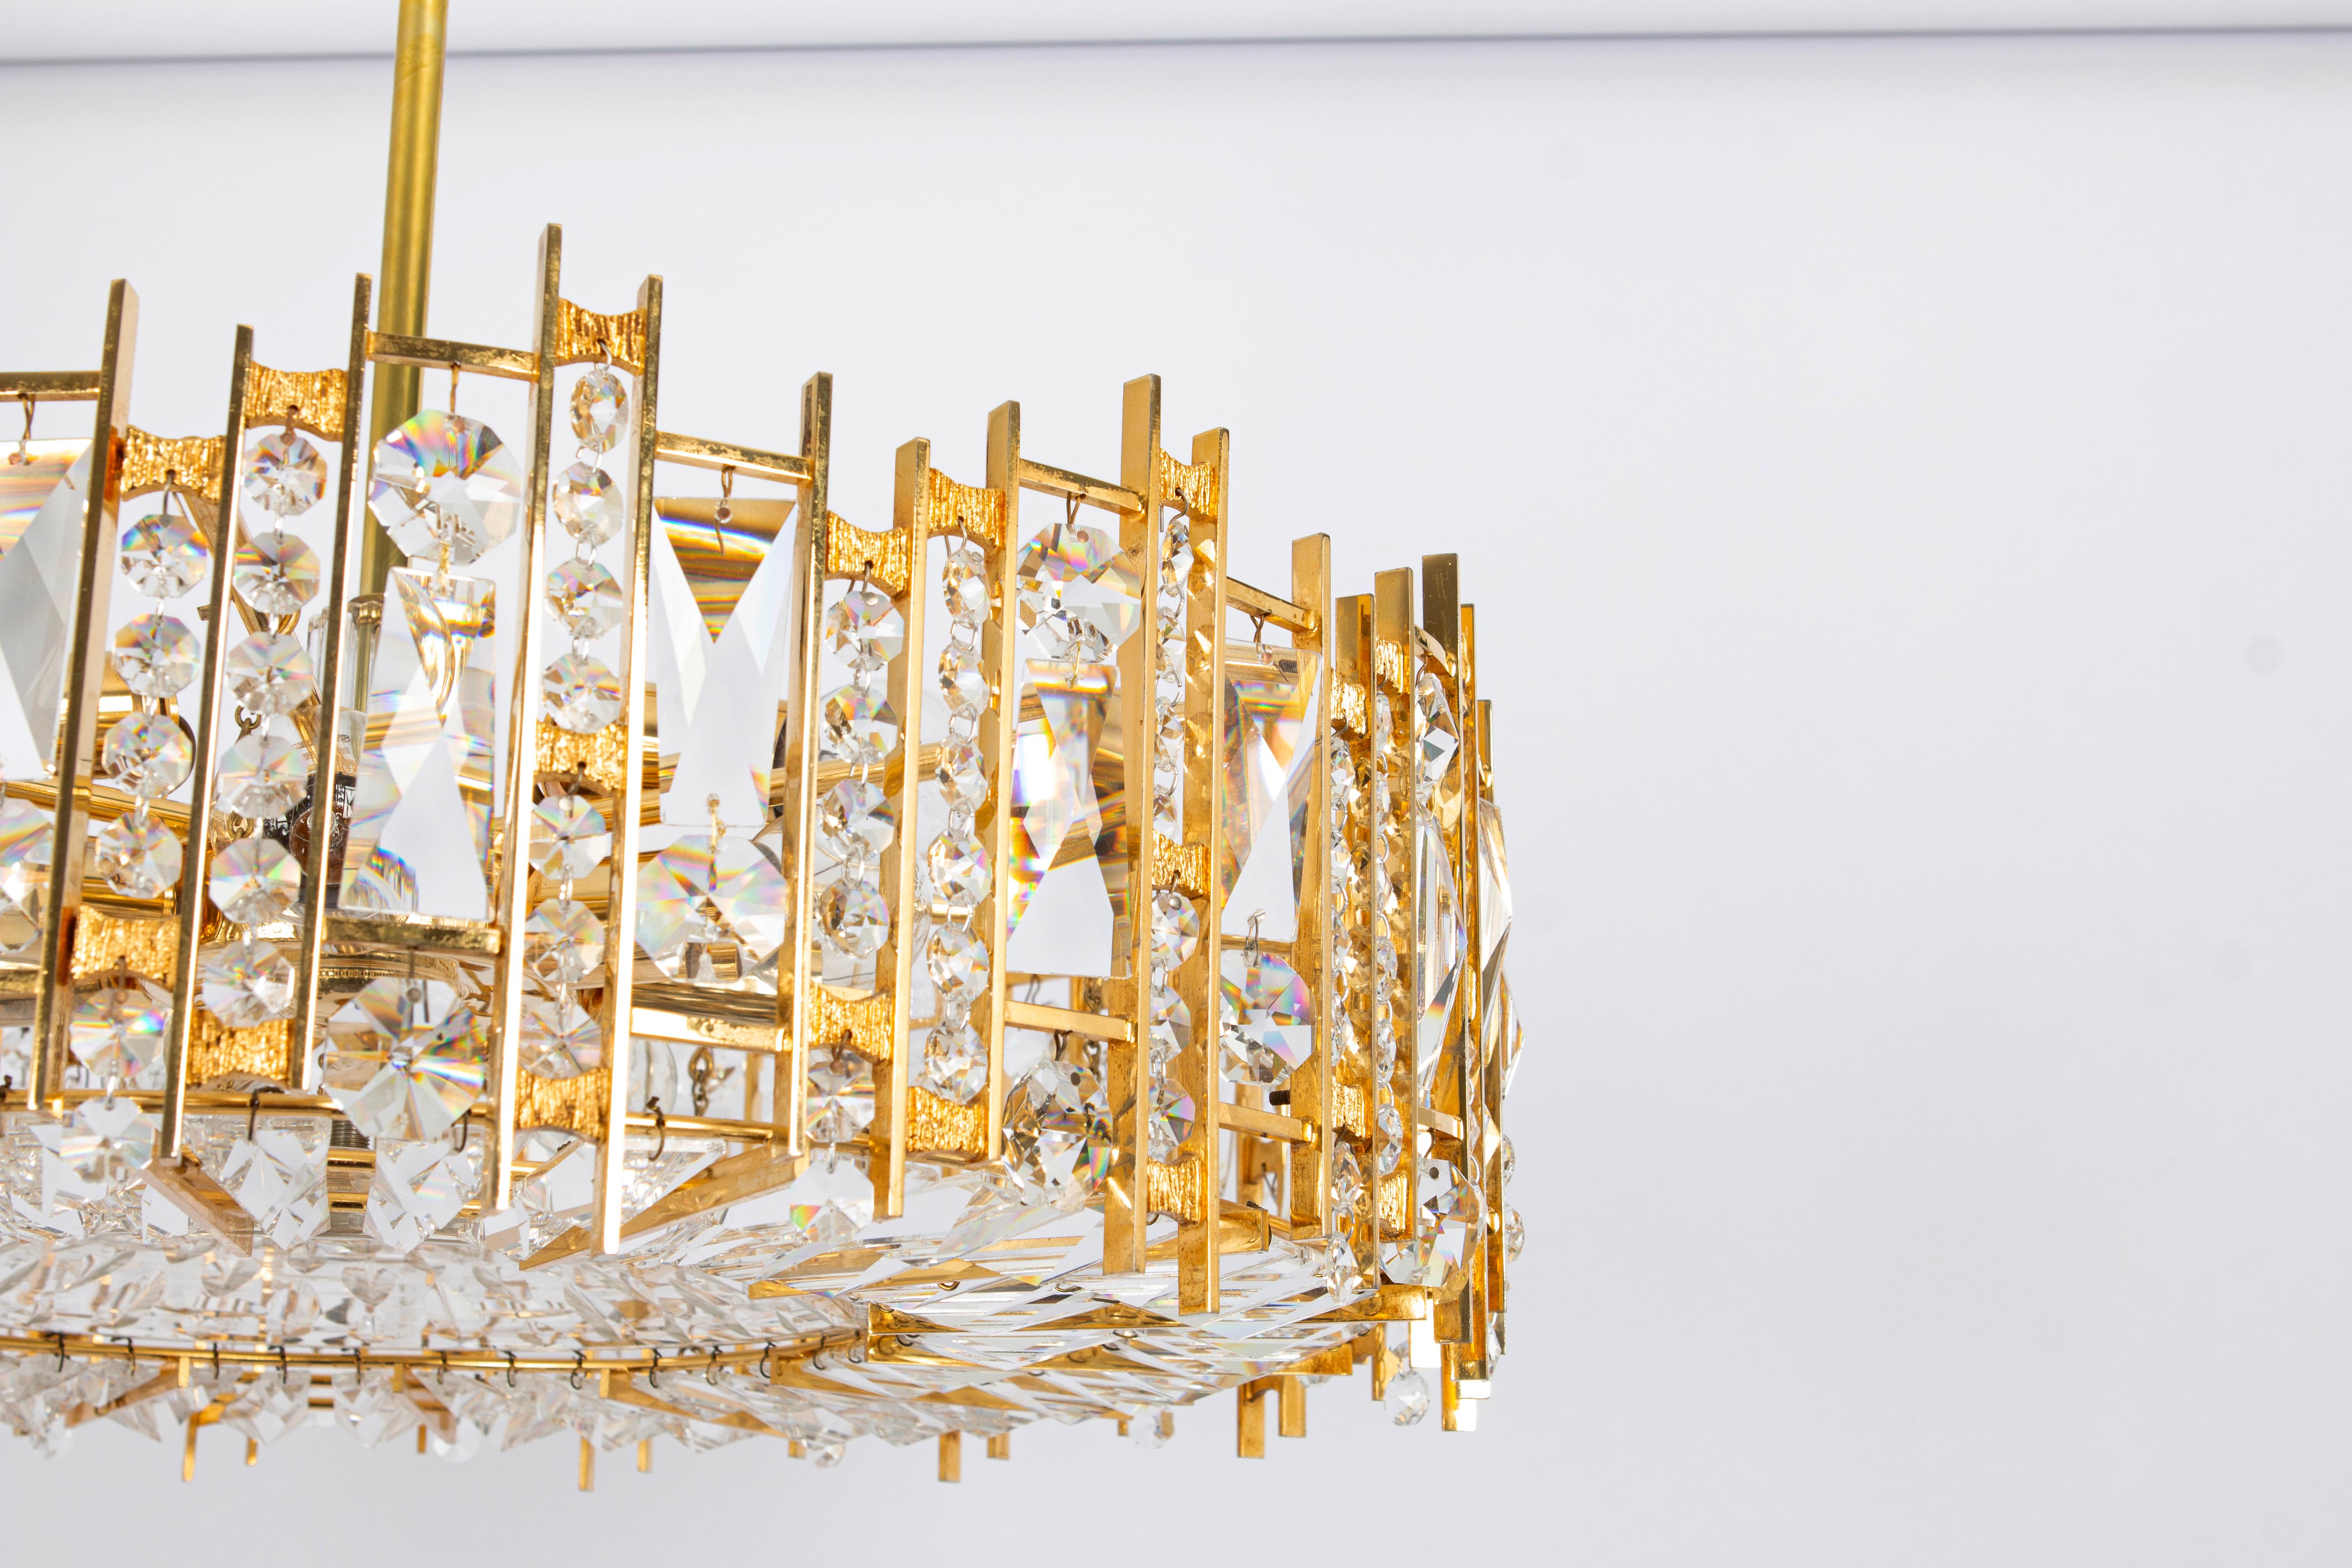 Mid-Century Modern Large Gilt Brass and Crystal Chandelier, by Palwa, Germany, 1970s For Sale